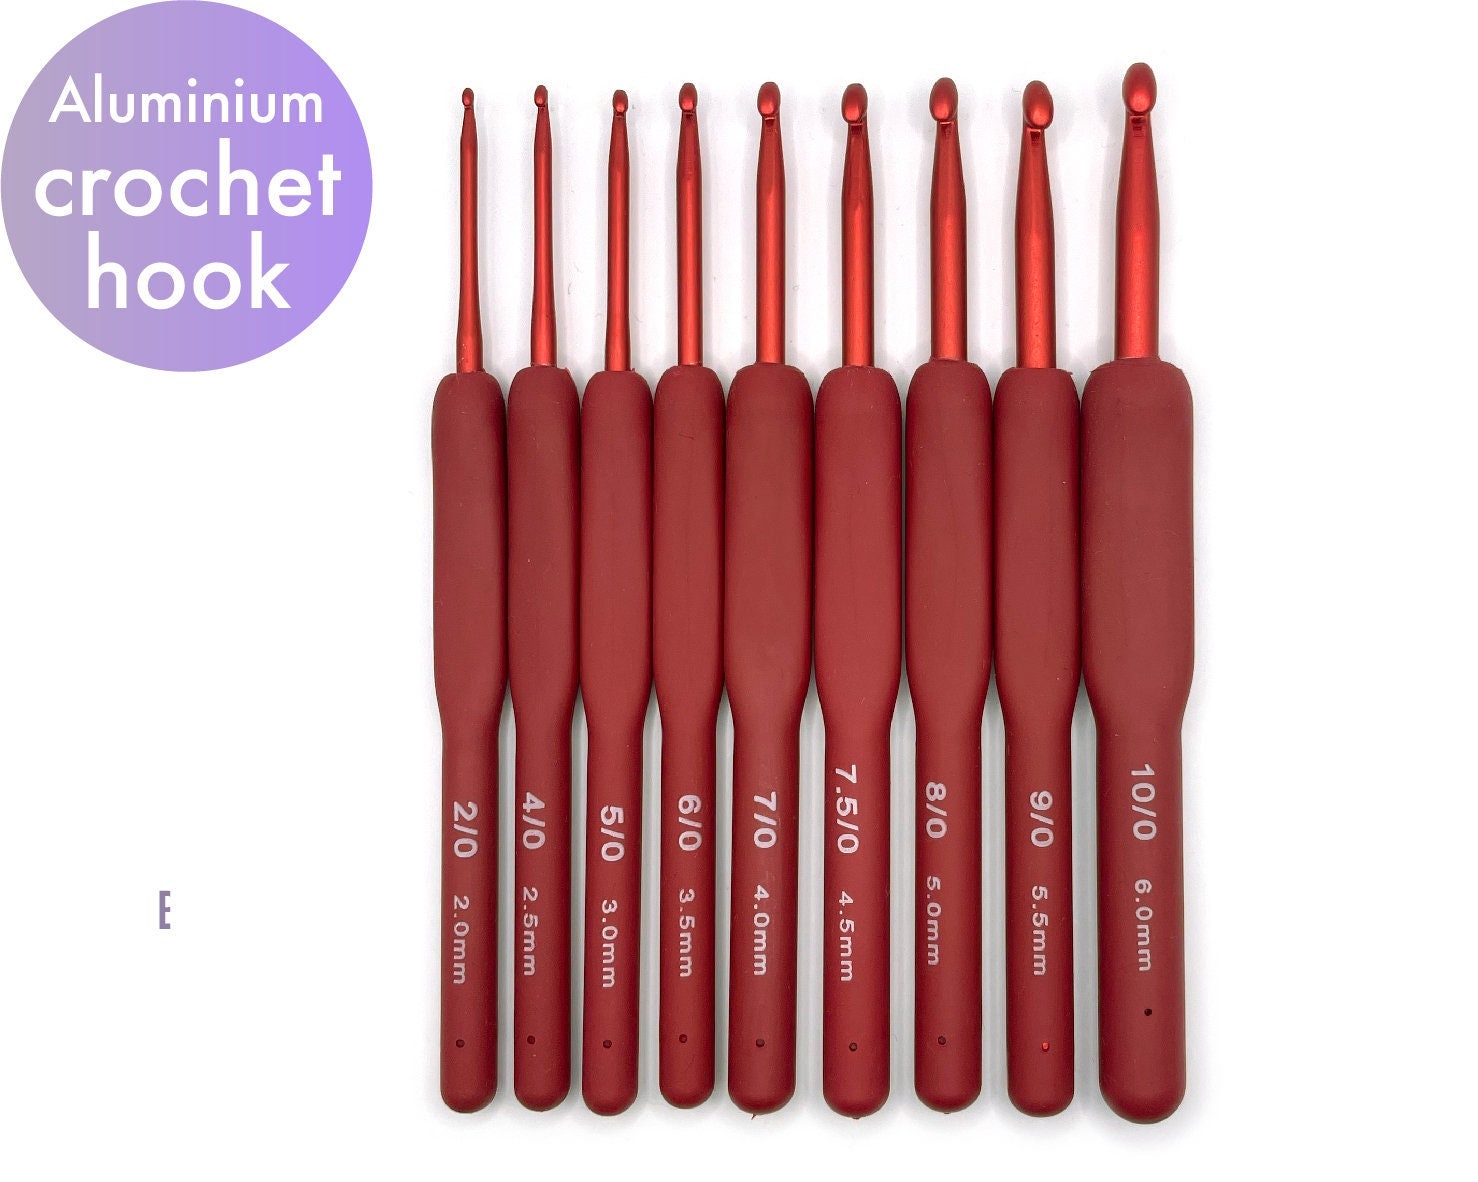 Tulip Etimo Rose Crochet Hooks Set in Small Case With Ruler and Yarn  Needle, Perfect Gift for Crocheters, 4/0, 5/0, 6/0 2.5, 3.0, 3.5mm, 